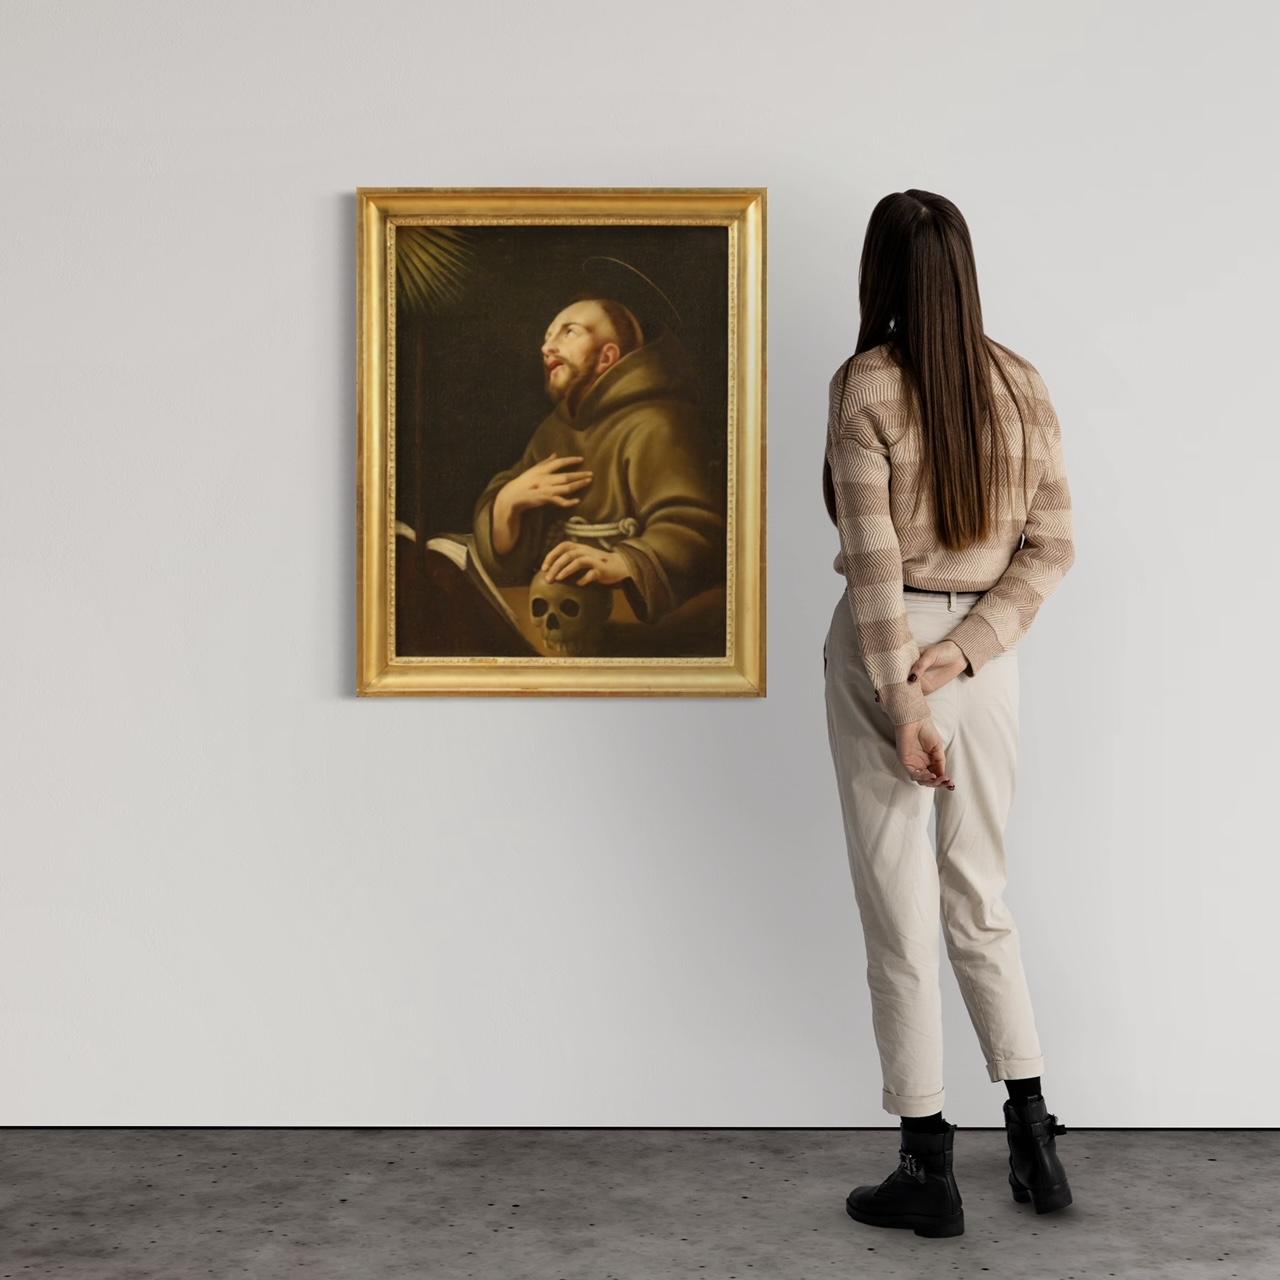 Antique French painting from the 18th century. Framework oil on canvas depicting a religious subject Saint Francis of good pictorial quality. Non-contemporary frame in wood and plaster, carved and gilded, with some signs of aging and a small lack of